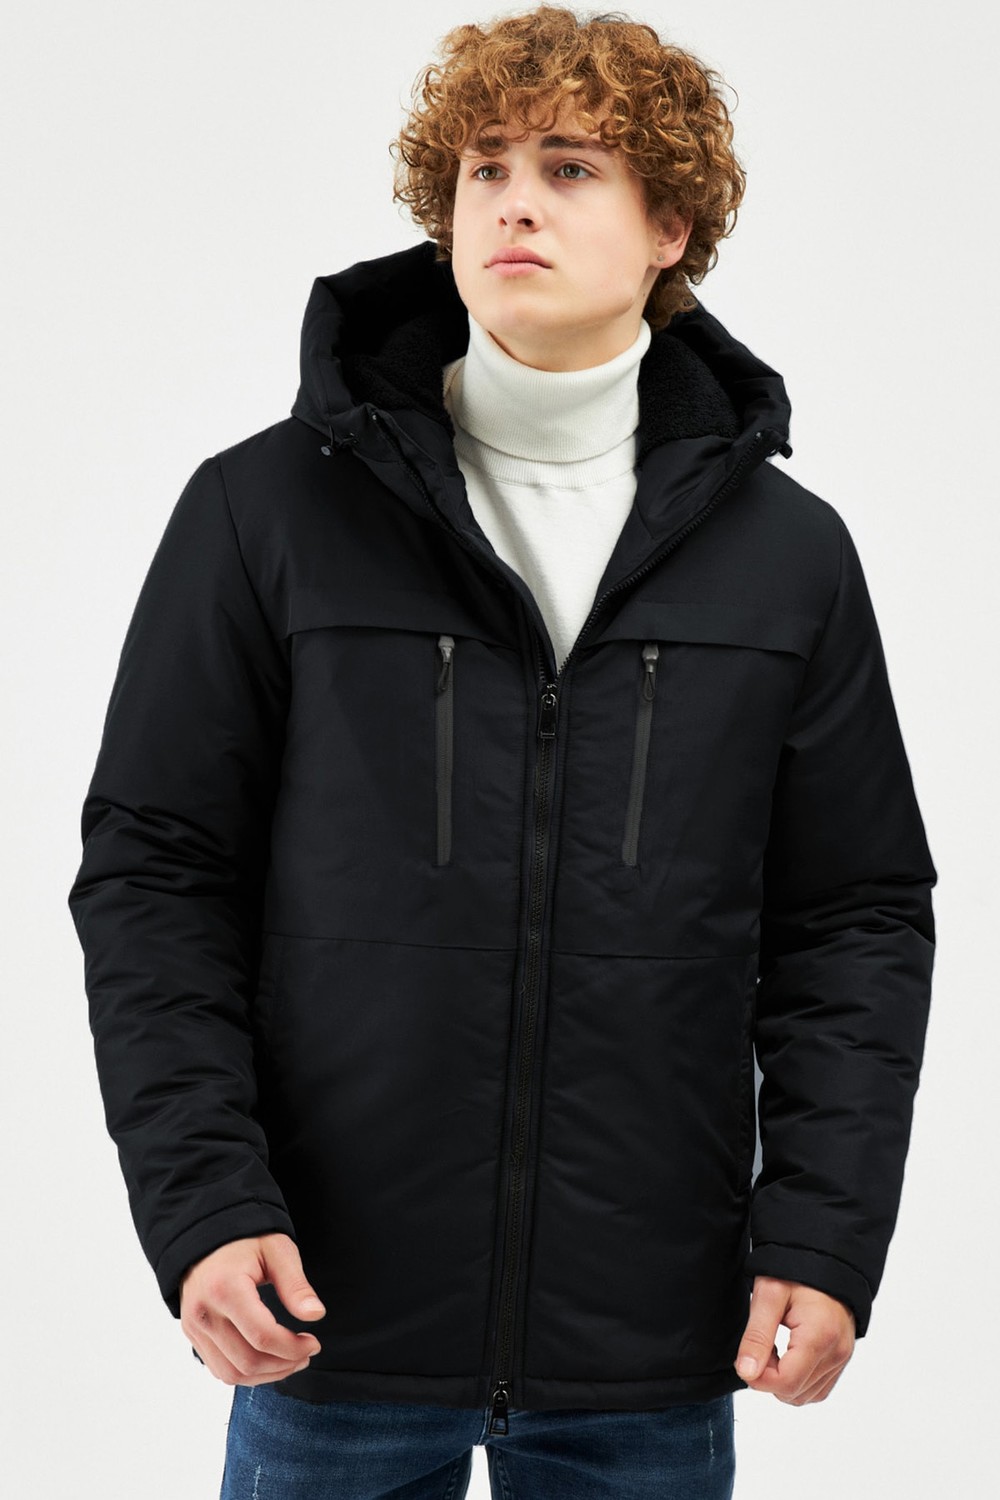 River Club Men's Black Shearling Coat & Parka Water And Windproof Hooded Winter Winter Jackets.